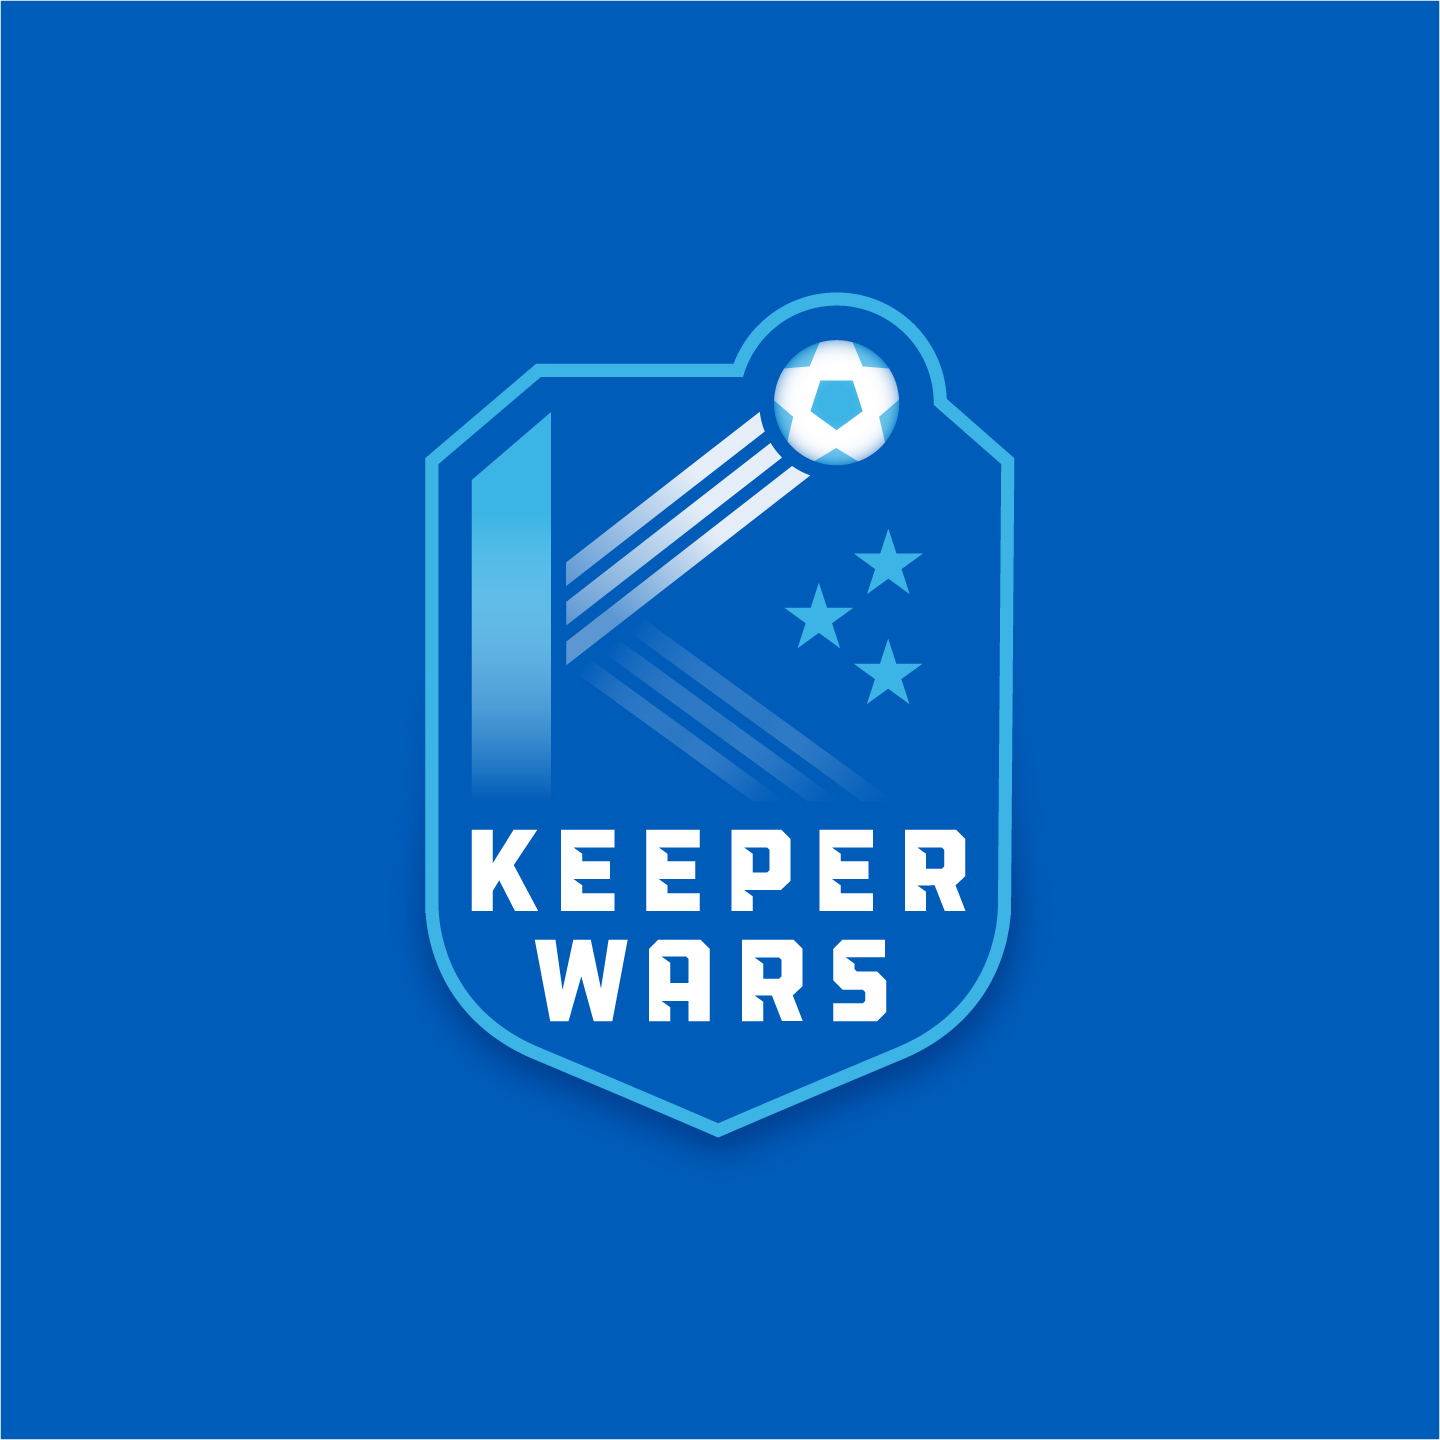 Keeper Wars Soccer Tournament Charity logo design by Hunter Oden of oden.house